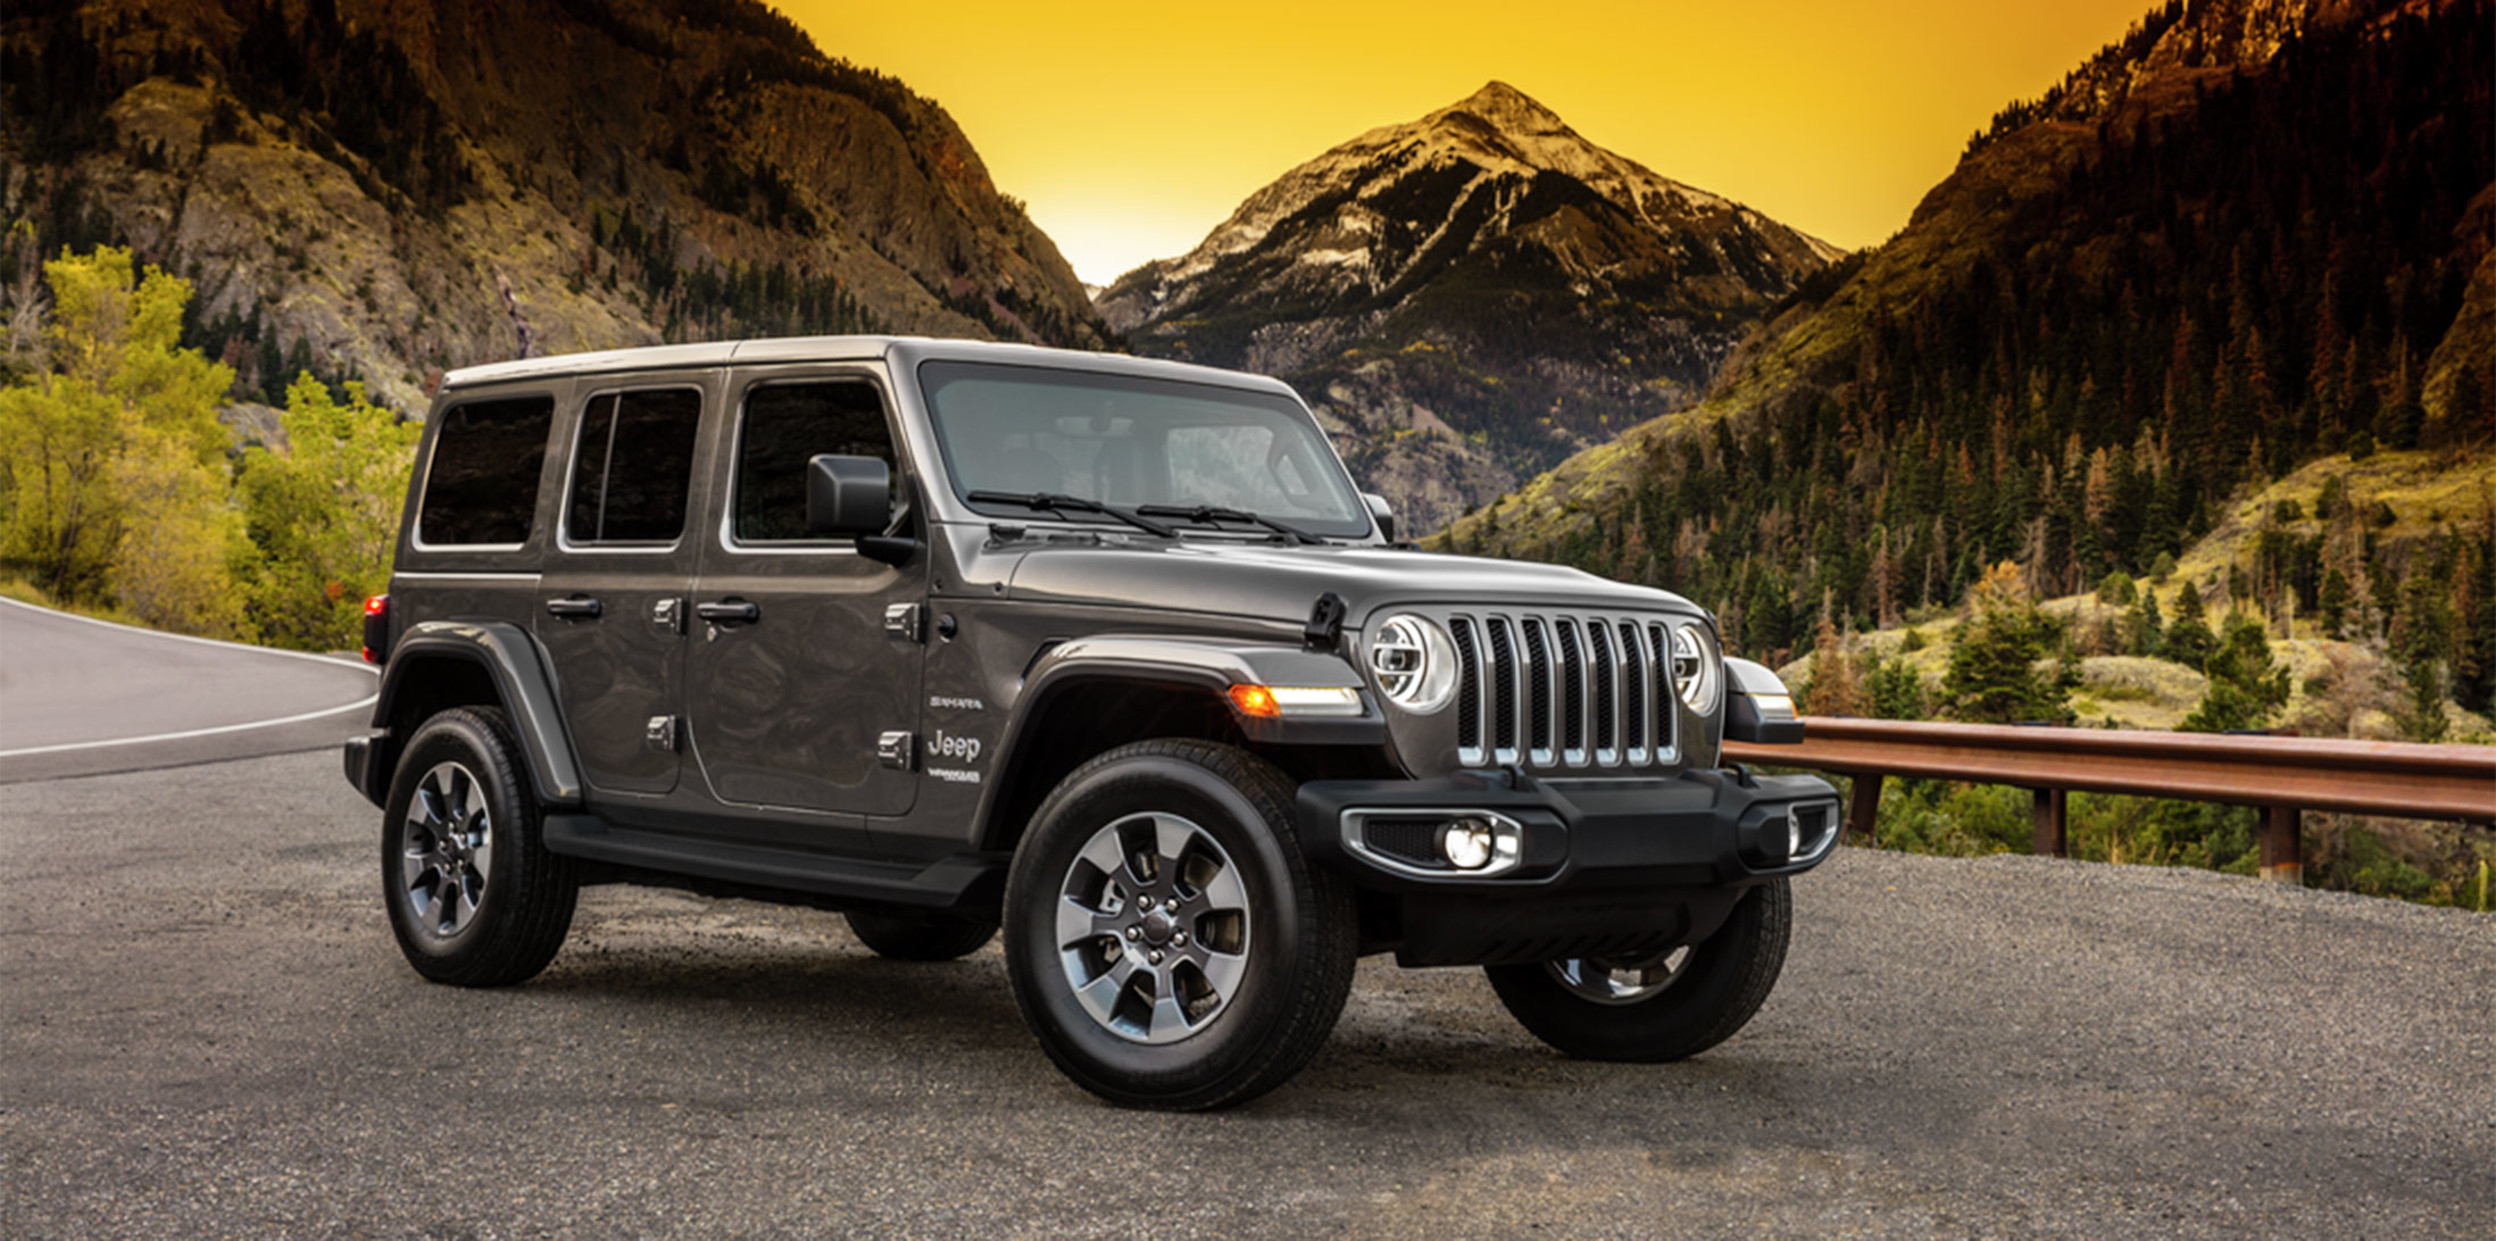 Black Jeep Wrangler parked on road with mountains in the background.